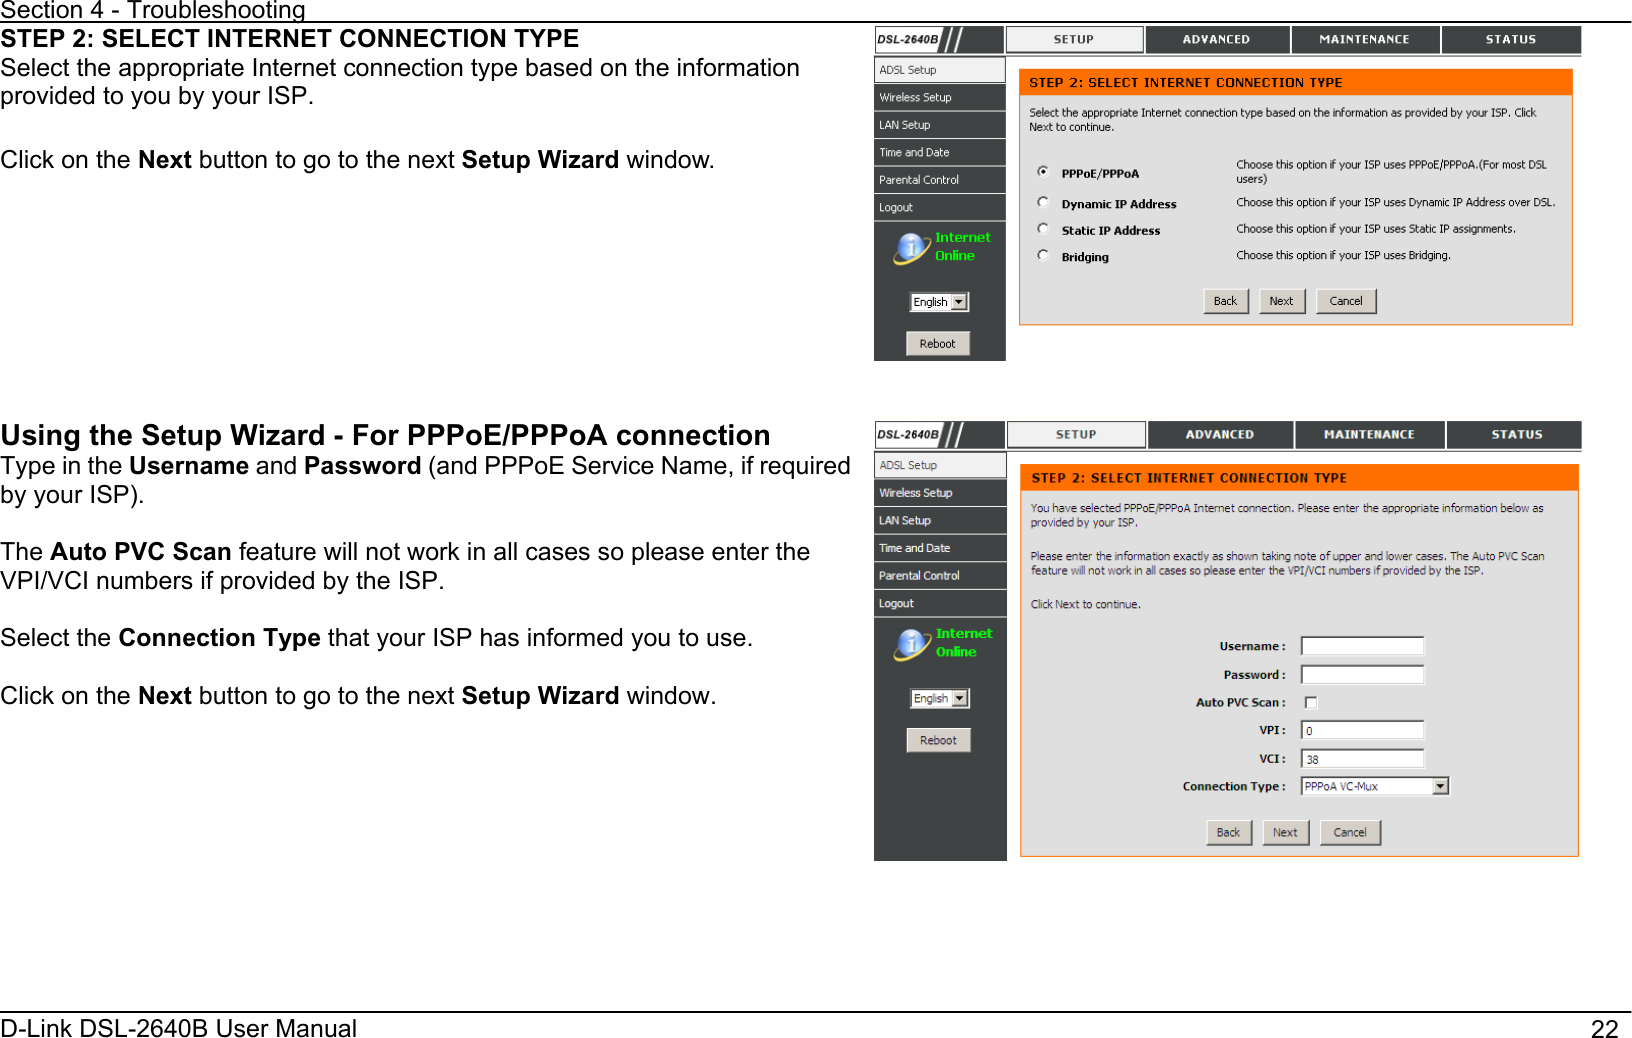 Section 4 - Troubleshooting D-Link DSL-2640B User Manual                                       22STEP 2: SELECT INTERNET CONNECTION TYPE Select the appropriate Internet connection type based on the information provided to you by your ISP.   Click on the Next button to go to the next Setup Wizard window. Using the Setup Wizard - For PPPoE/PPPoA connection Type in the Username and Password (and PPPoE Service Name, if required by your ISP).   The Auto PVC Scan feature will not work in all cases so please enter the VPI/VCI numbers if provided by the ISP. Select the Connection Type that your ISP has informed you to use. Click on the Next button to go to the next Setup Wizard window. 